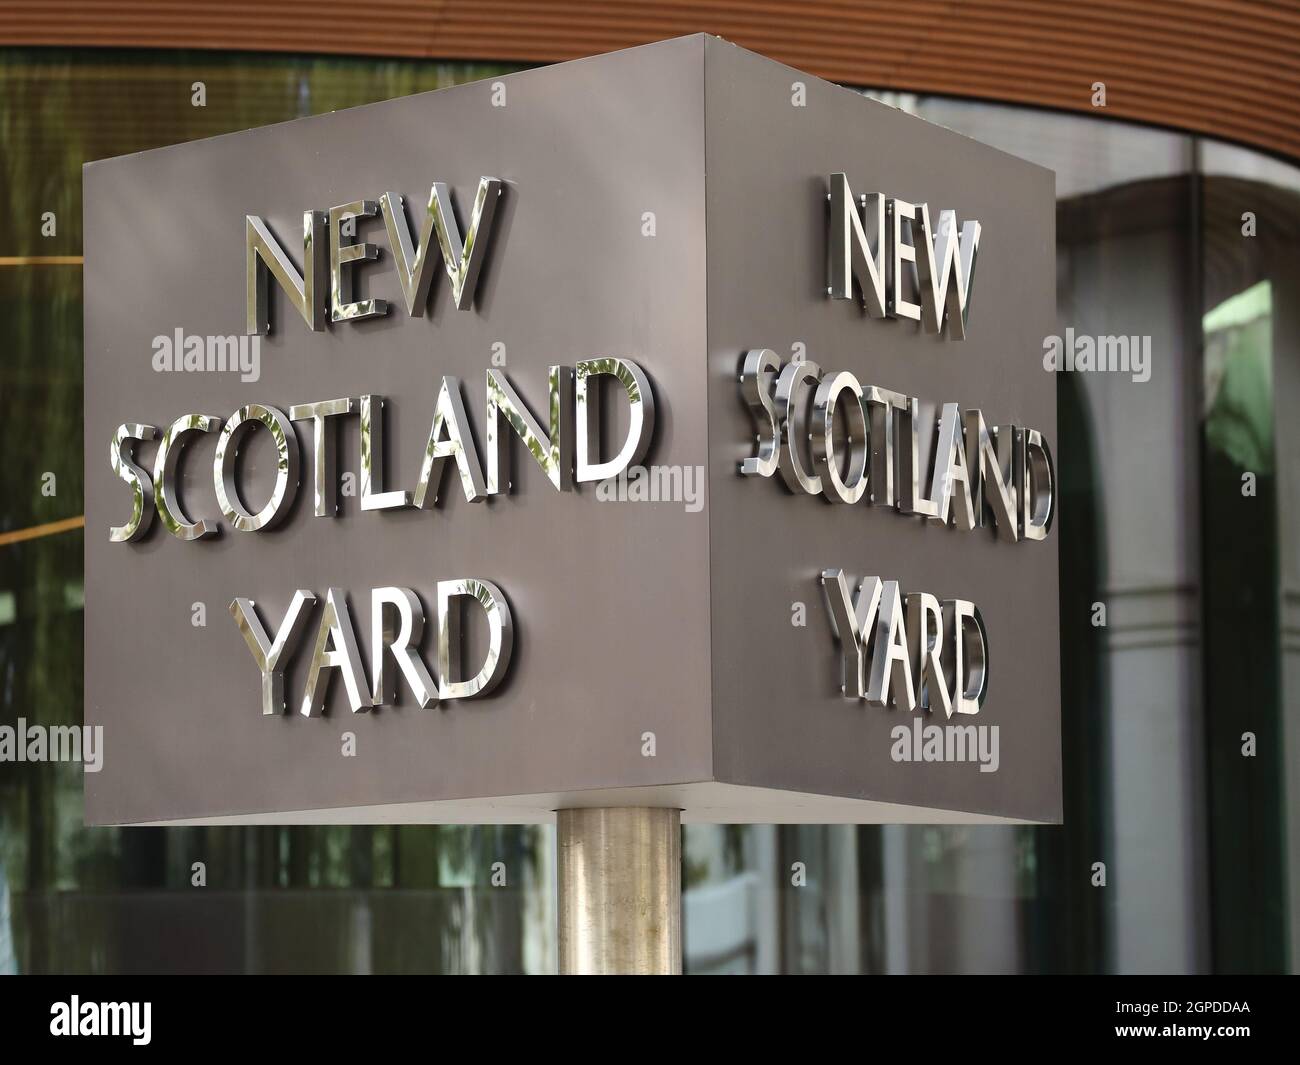 Rotating New Scotland Yard sign in Westminster, London, UK Stock Photo